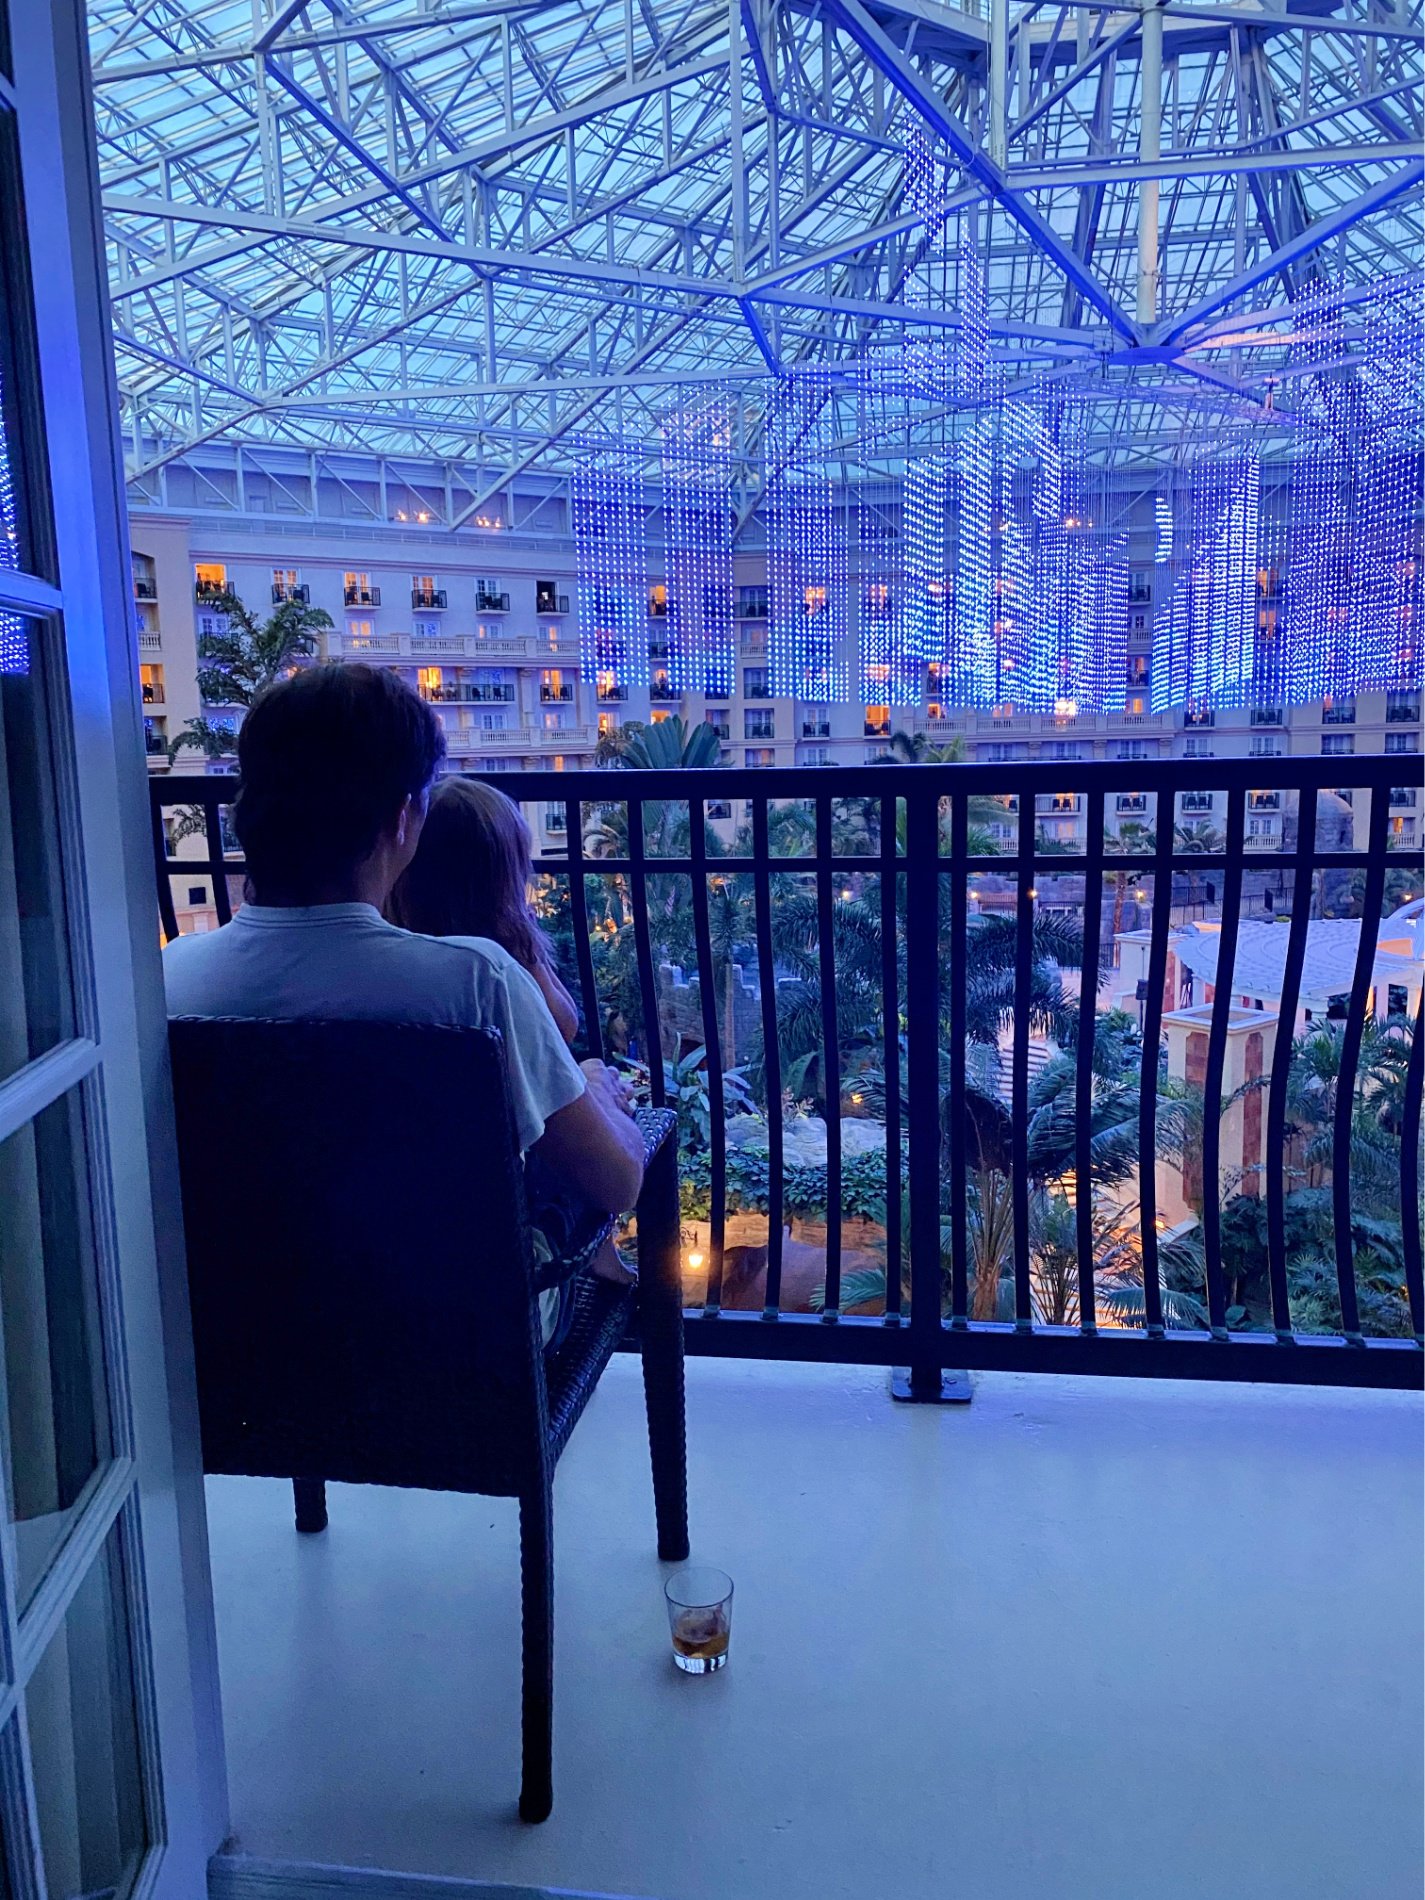 Child sitting on father's lap on balcony watching light show in hotel.